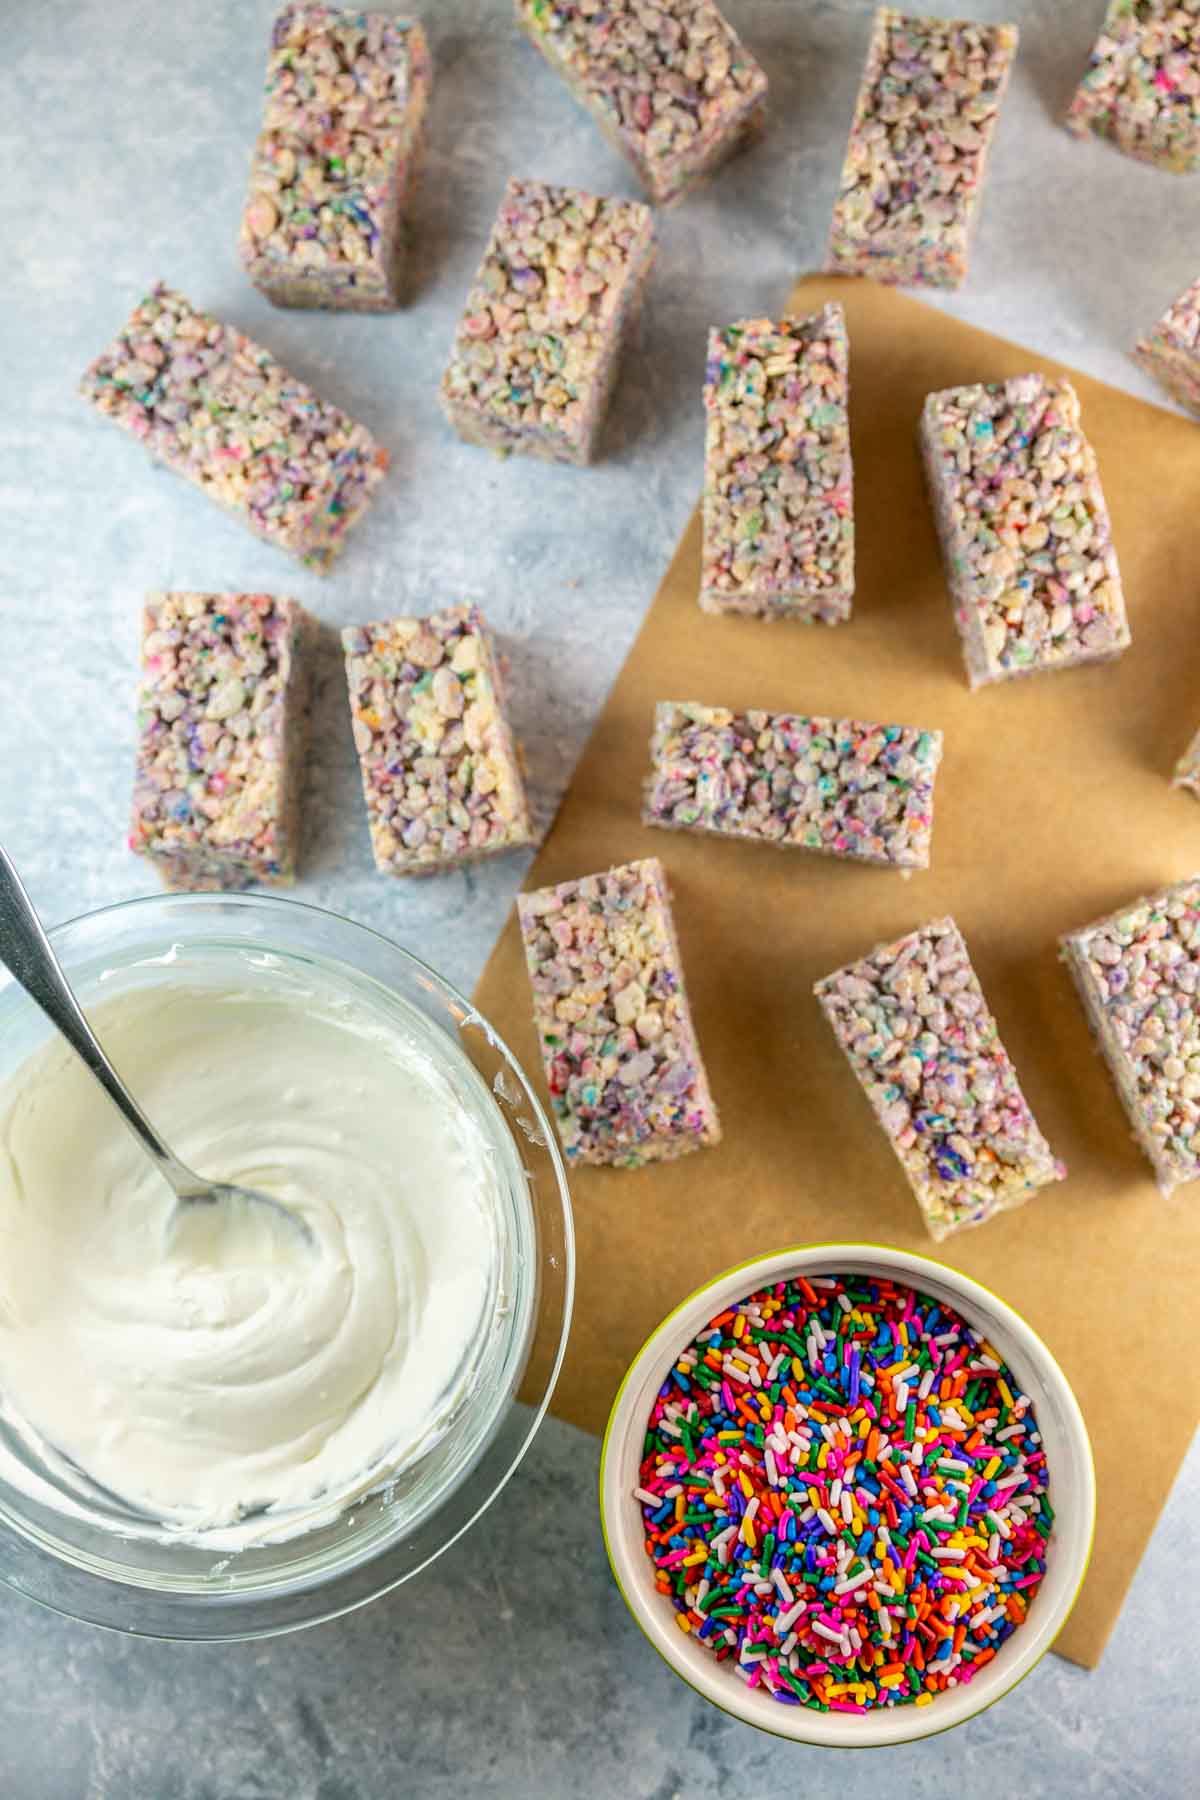 rice krispie treats cut into rectangles next to melted chocolate and sprinkles.